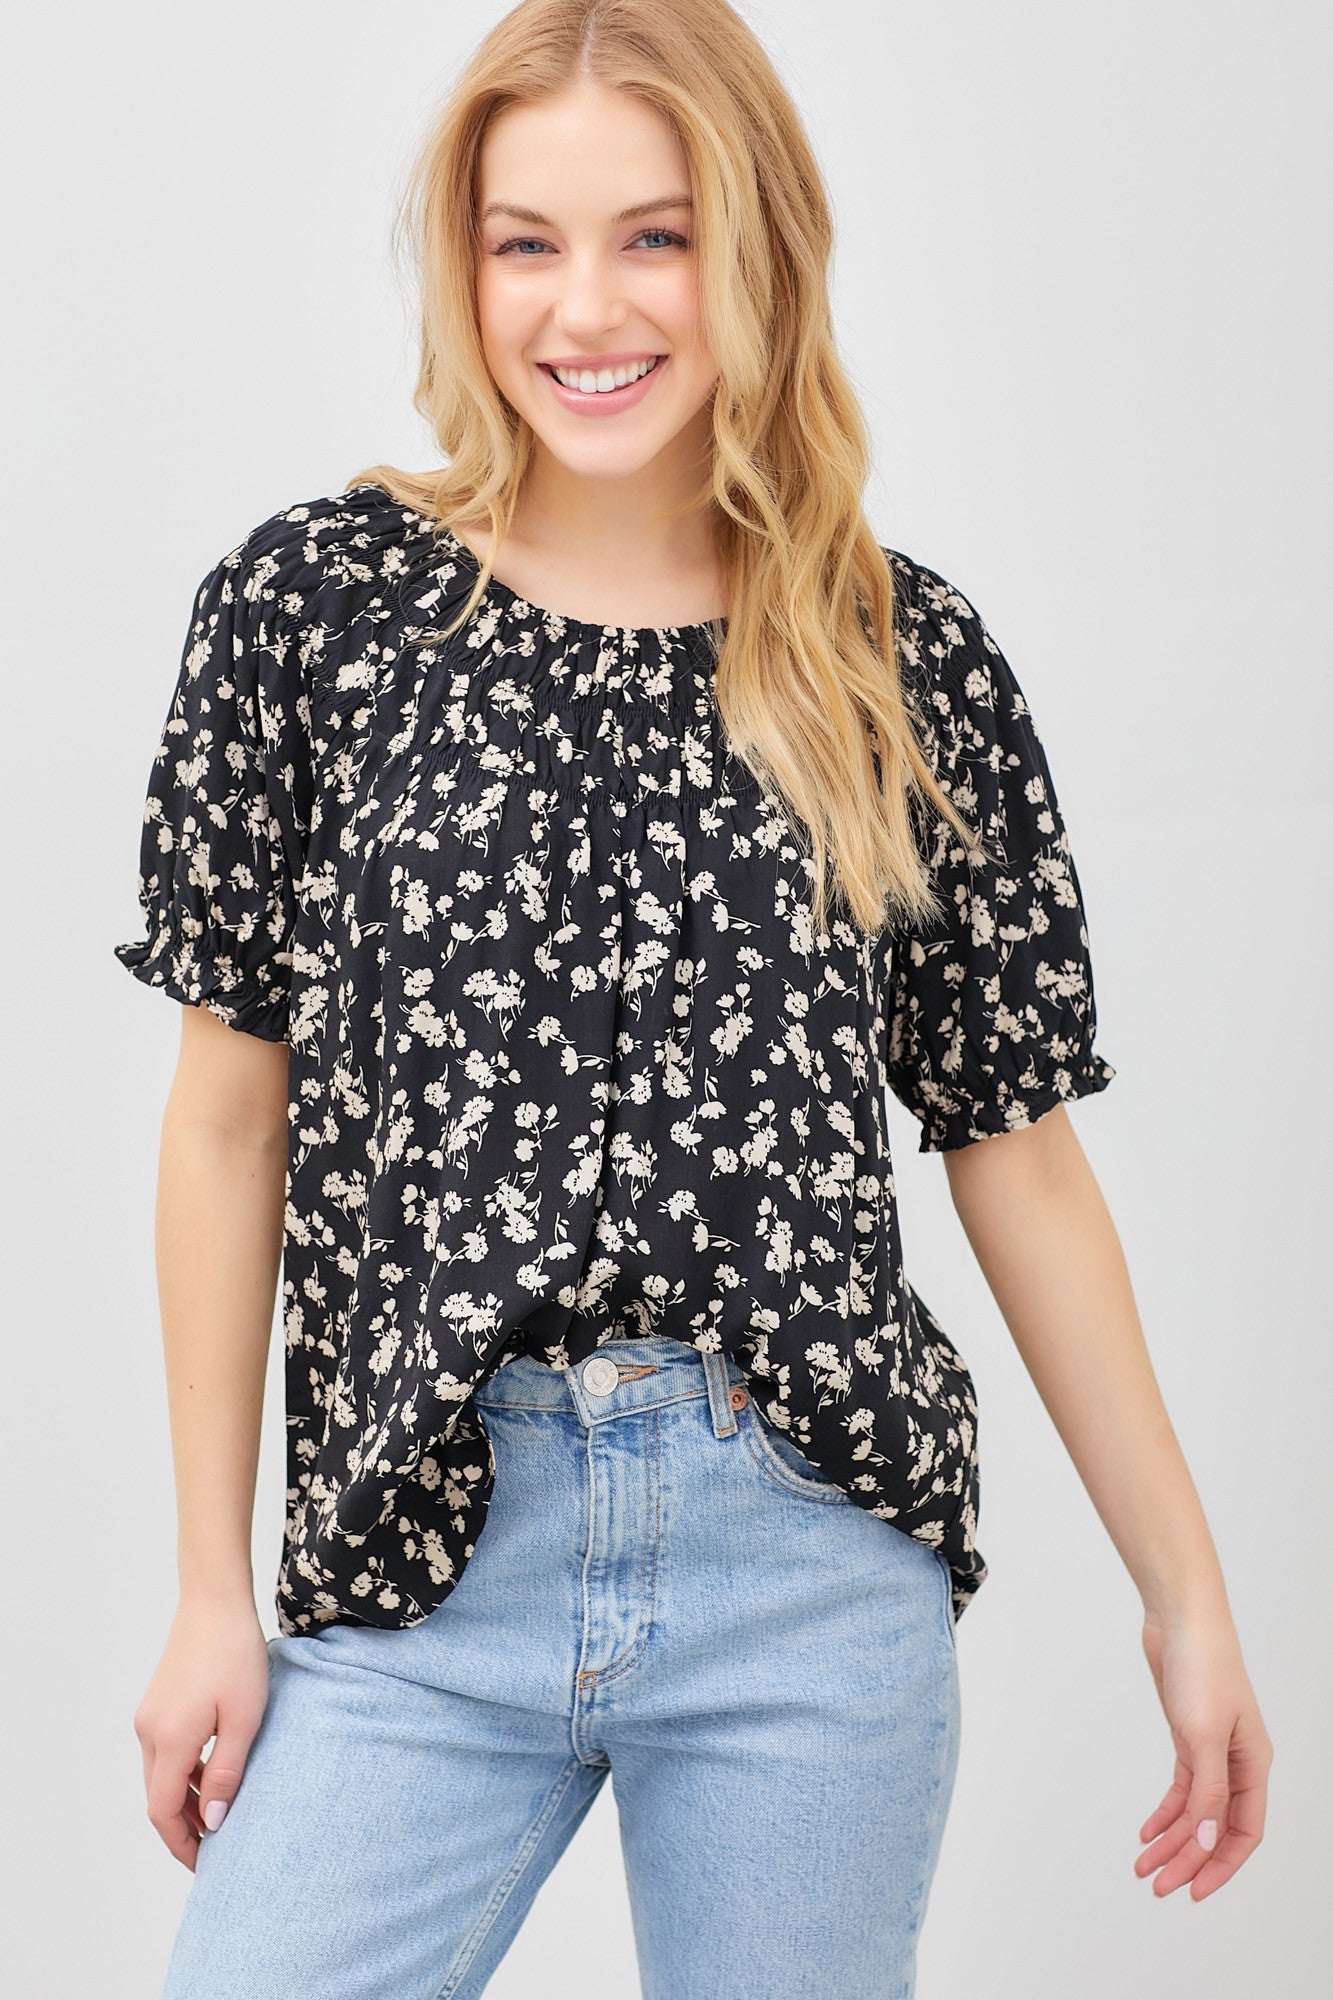 Go With The Flow Blouse - CURVY